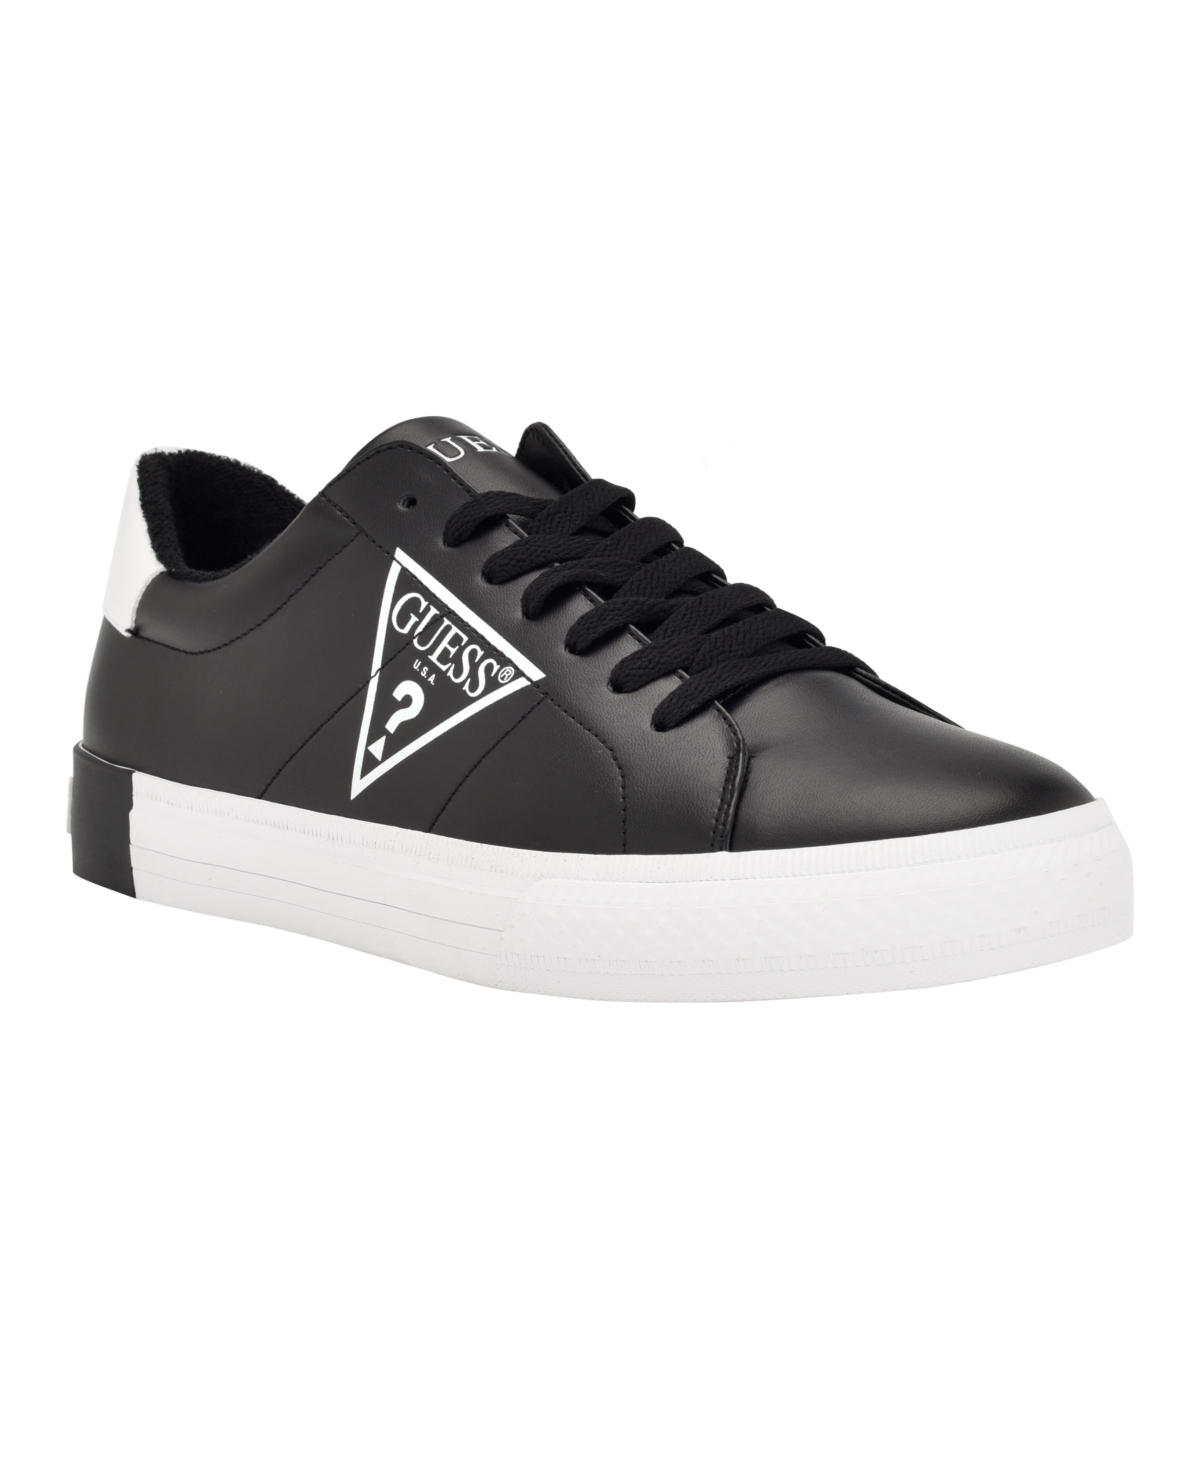 Guess Sevan Casual Low Top Lace Sneakers Men's Shoes In Black/white ModeSens